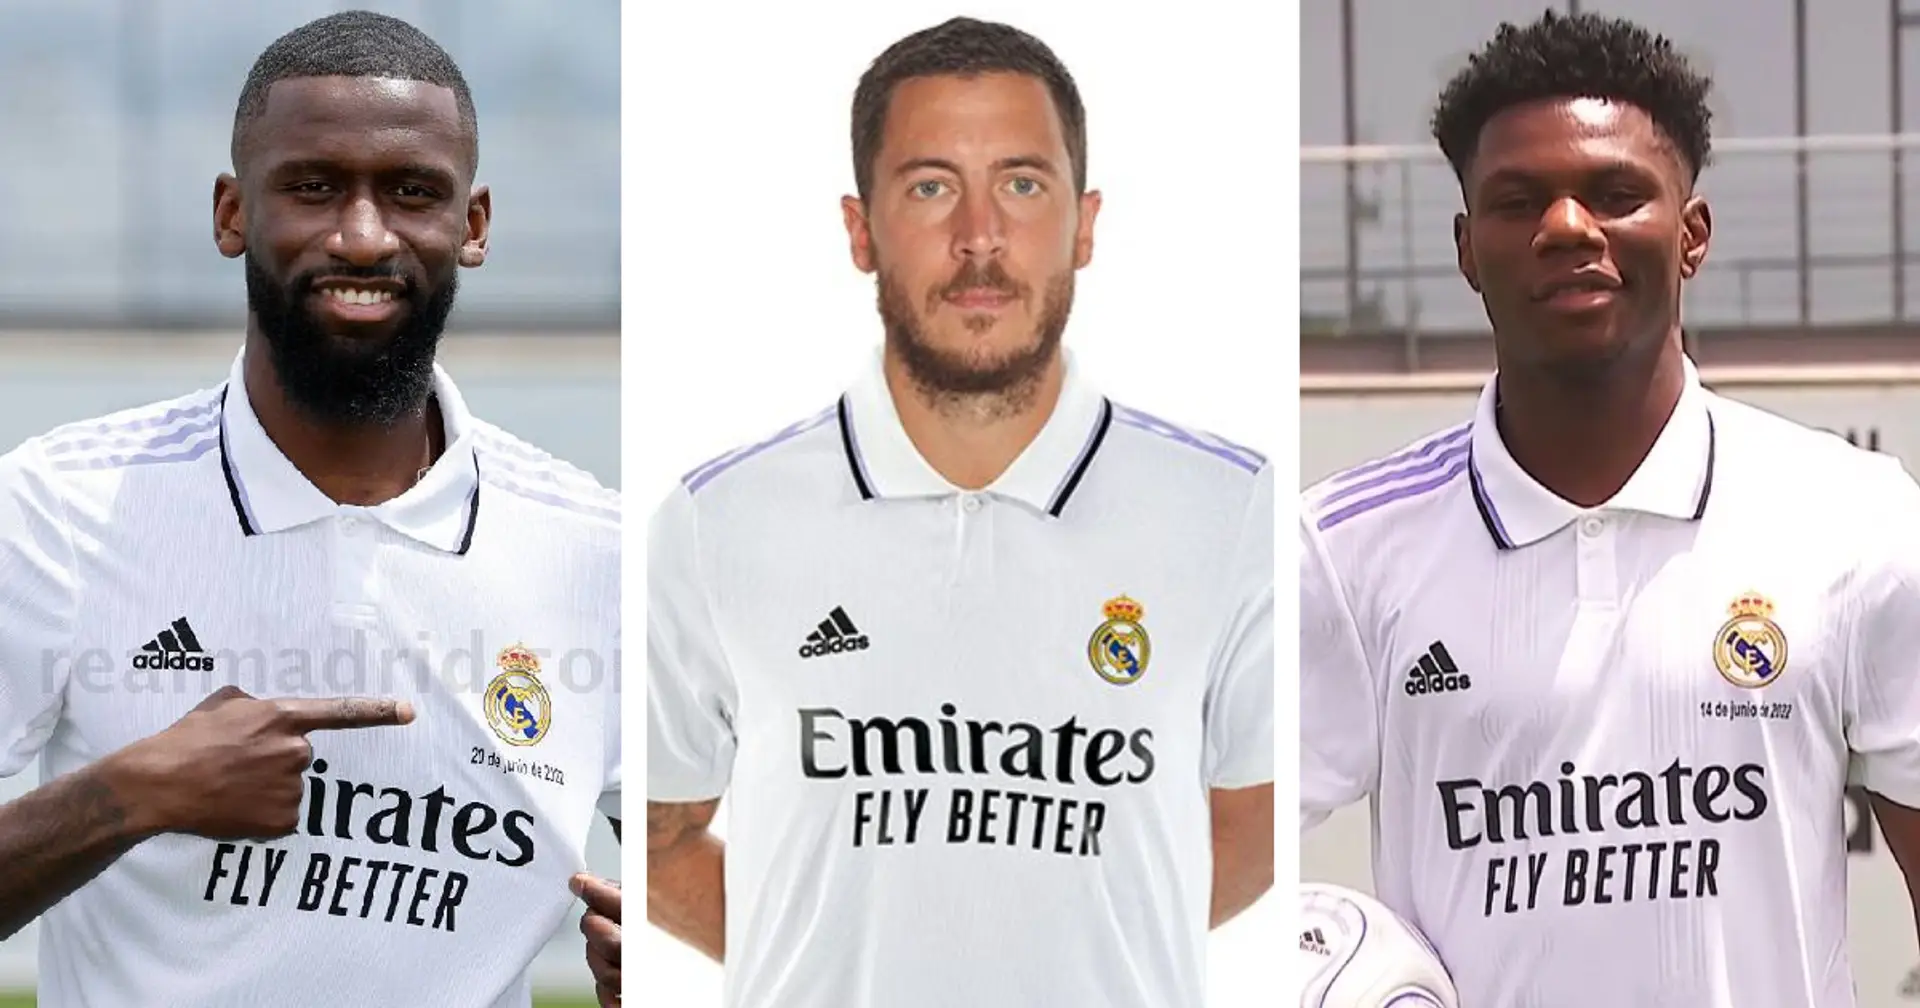 Real Madrid full squad before preseason - 5 players expected to leave 